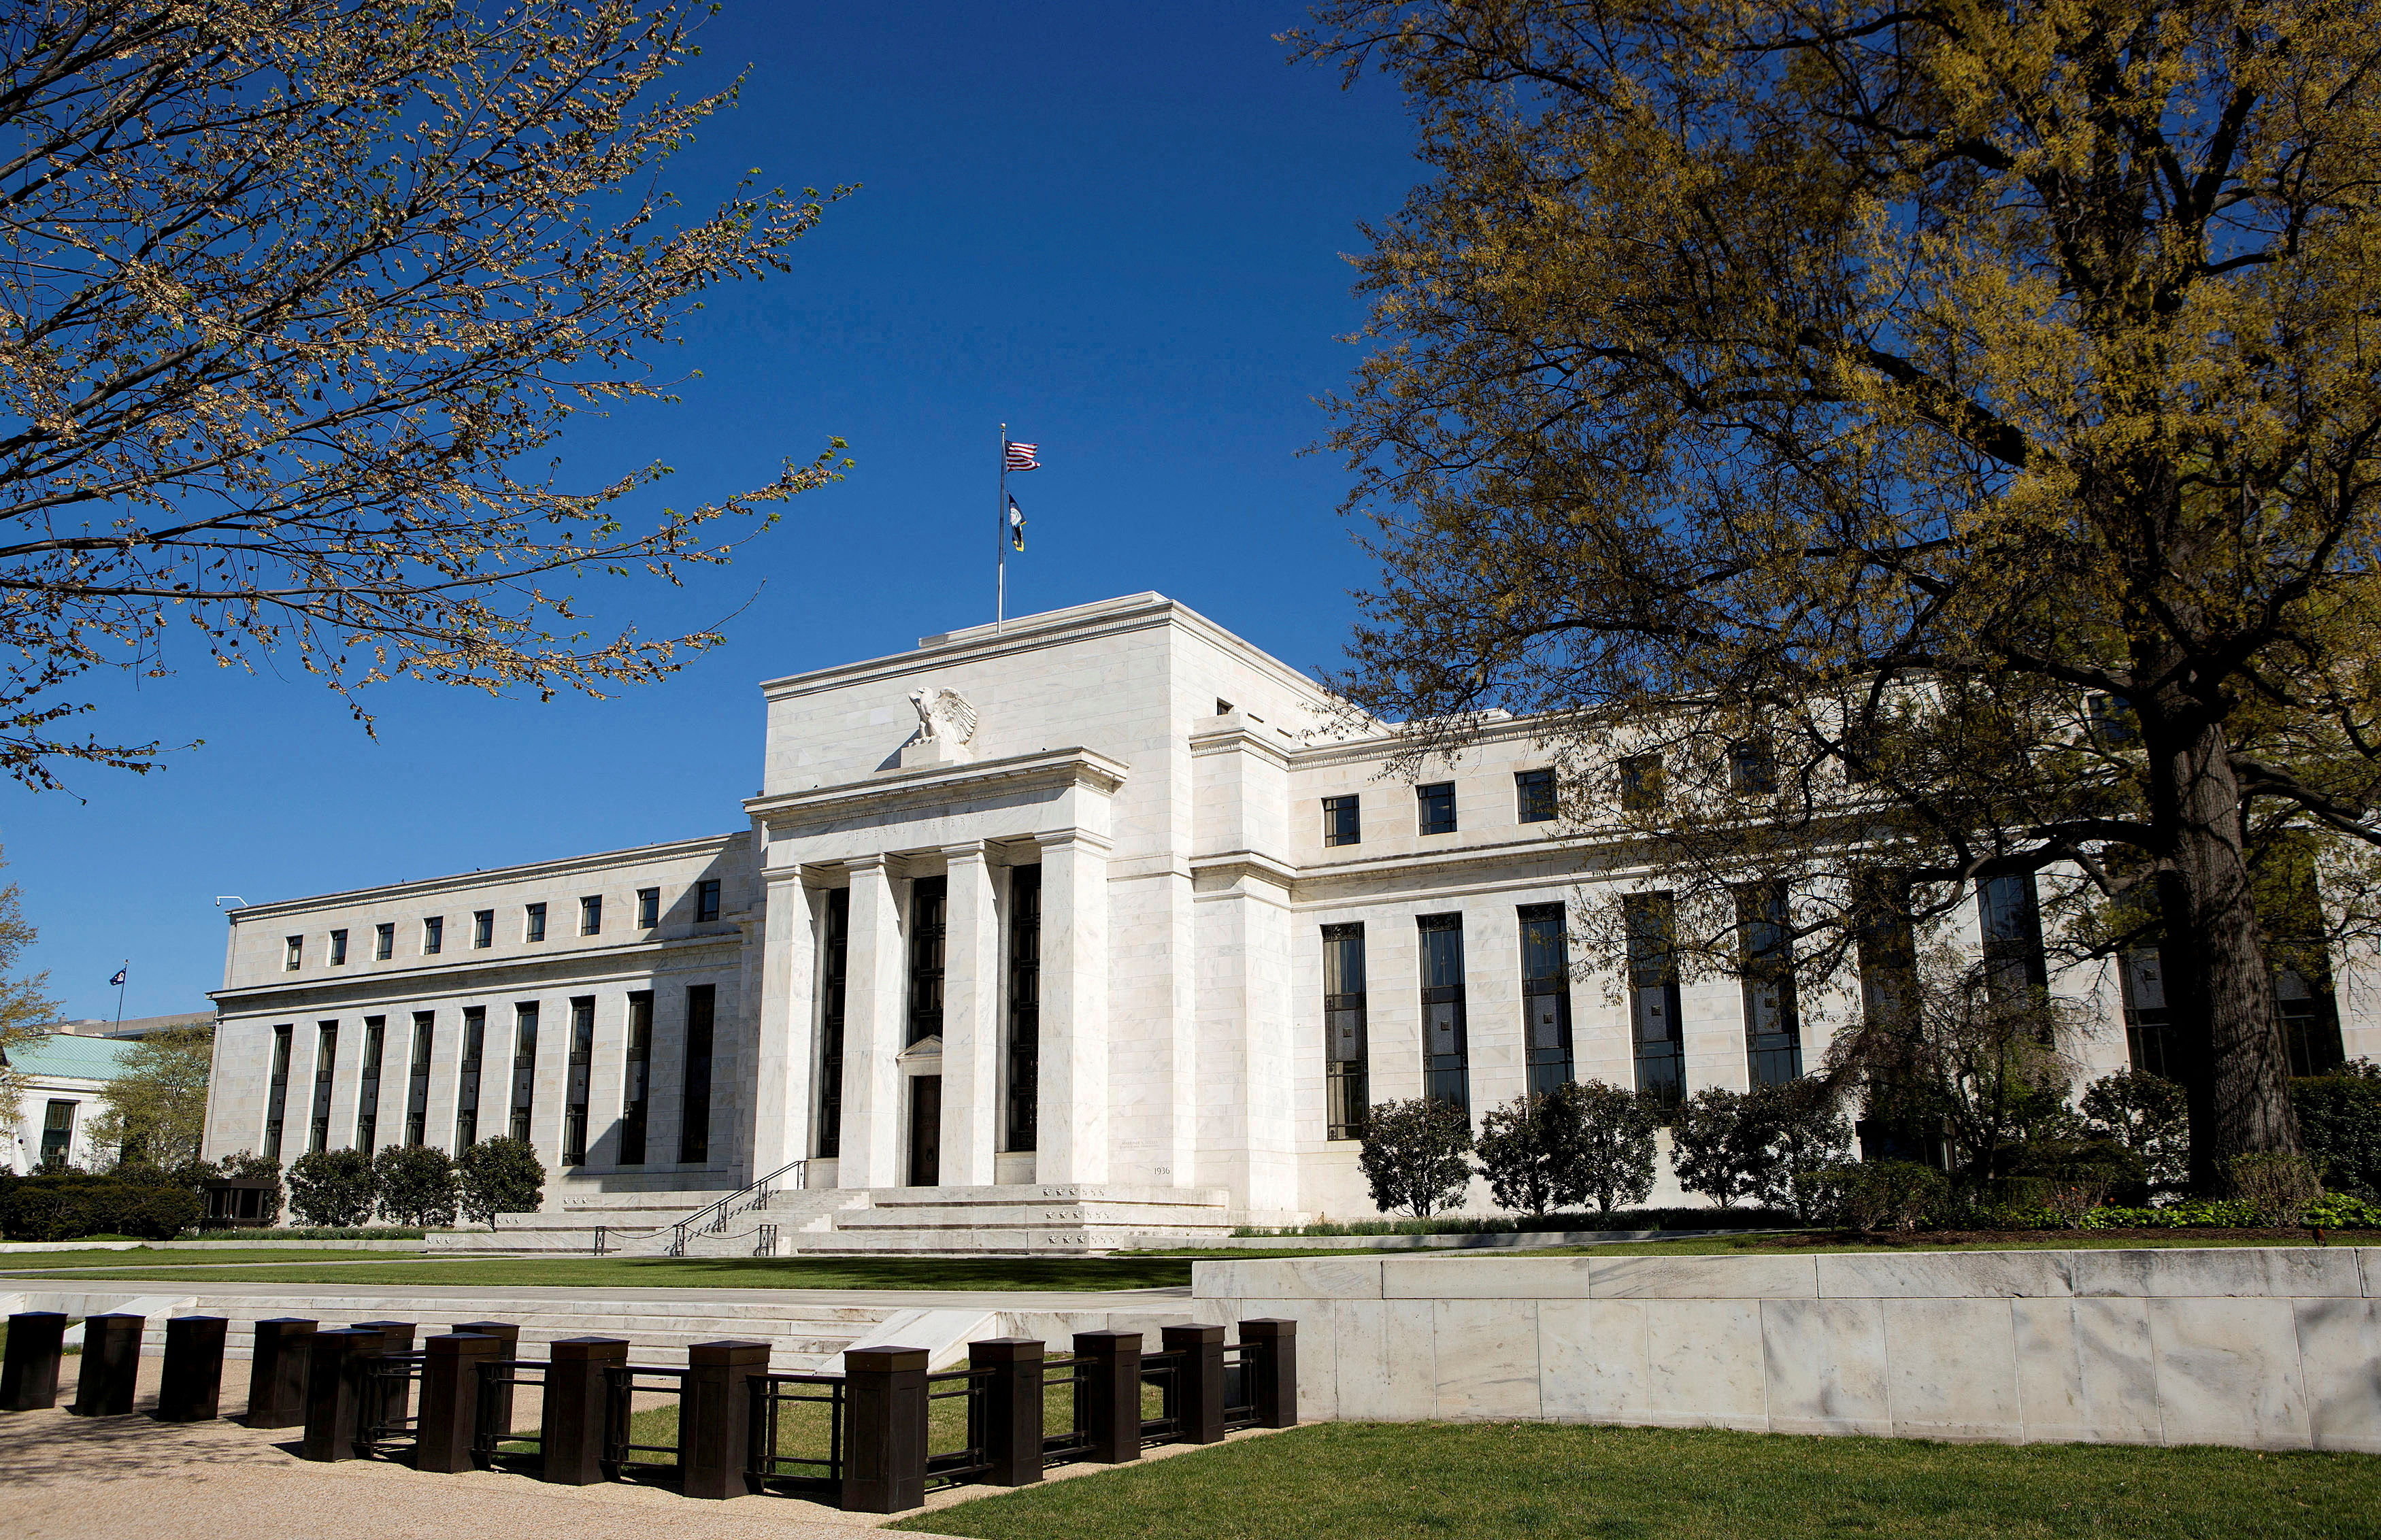 The Federal Reserve Building in Washington